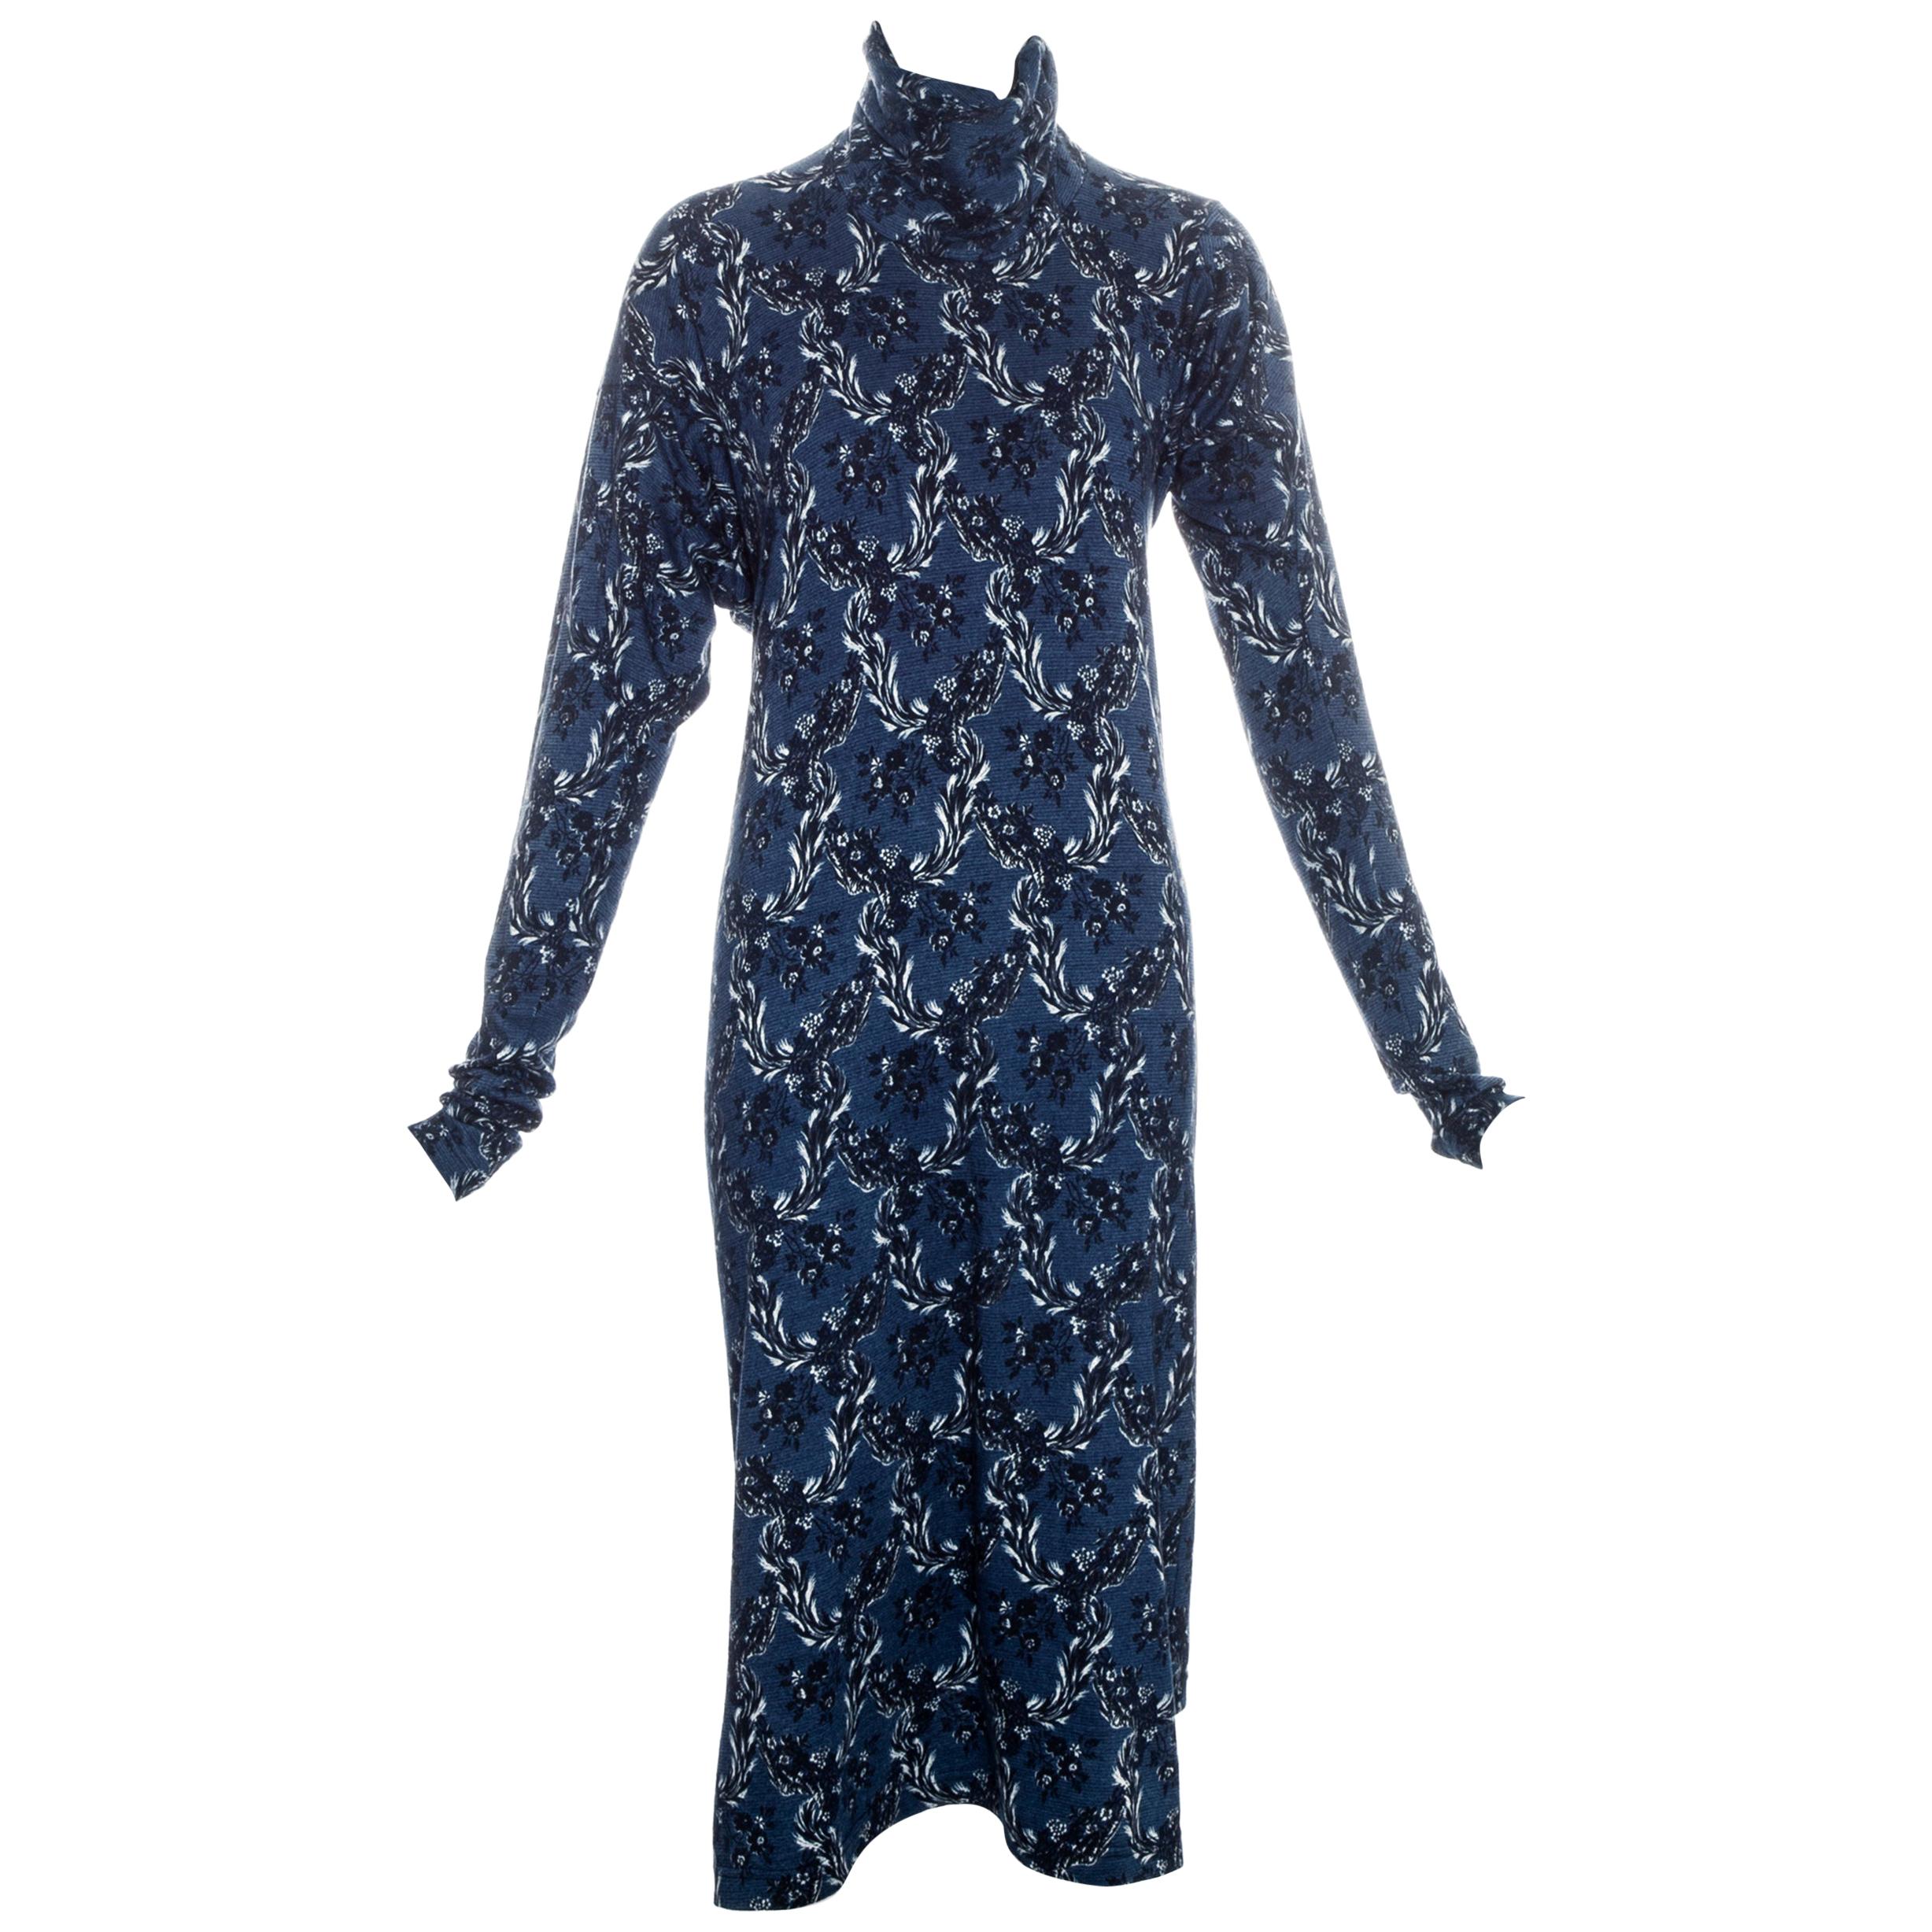 Vivienne Westwood blue and white floral print roll-neck dress, fw 1996